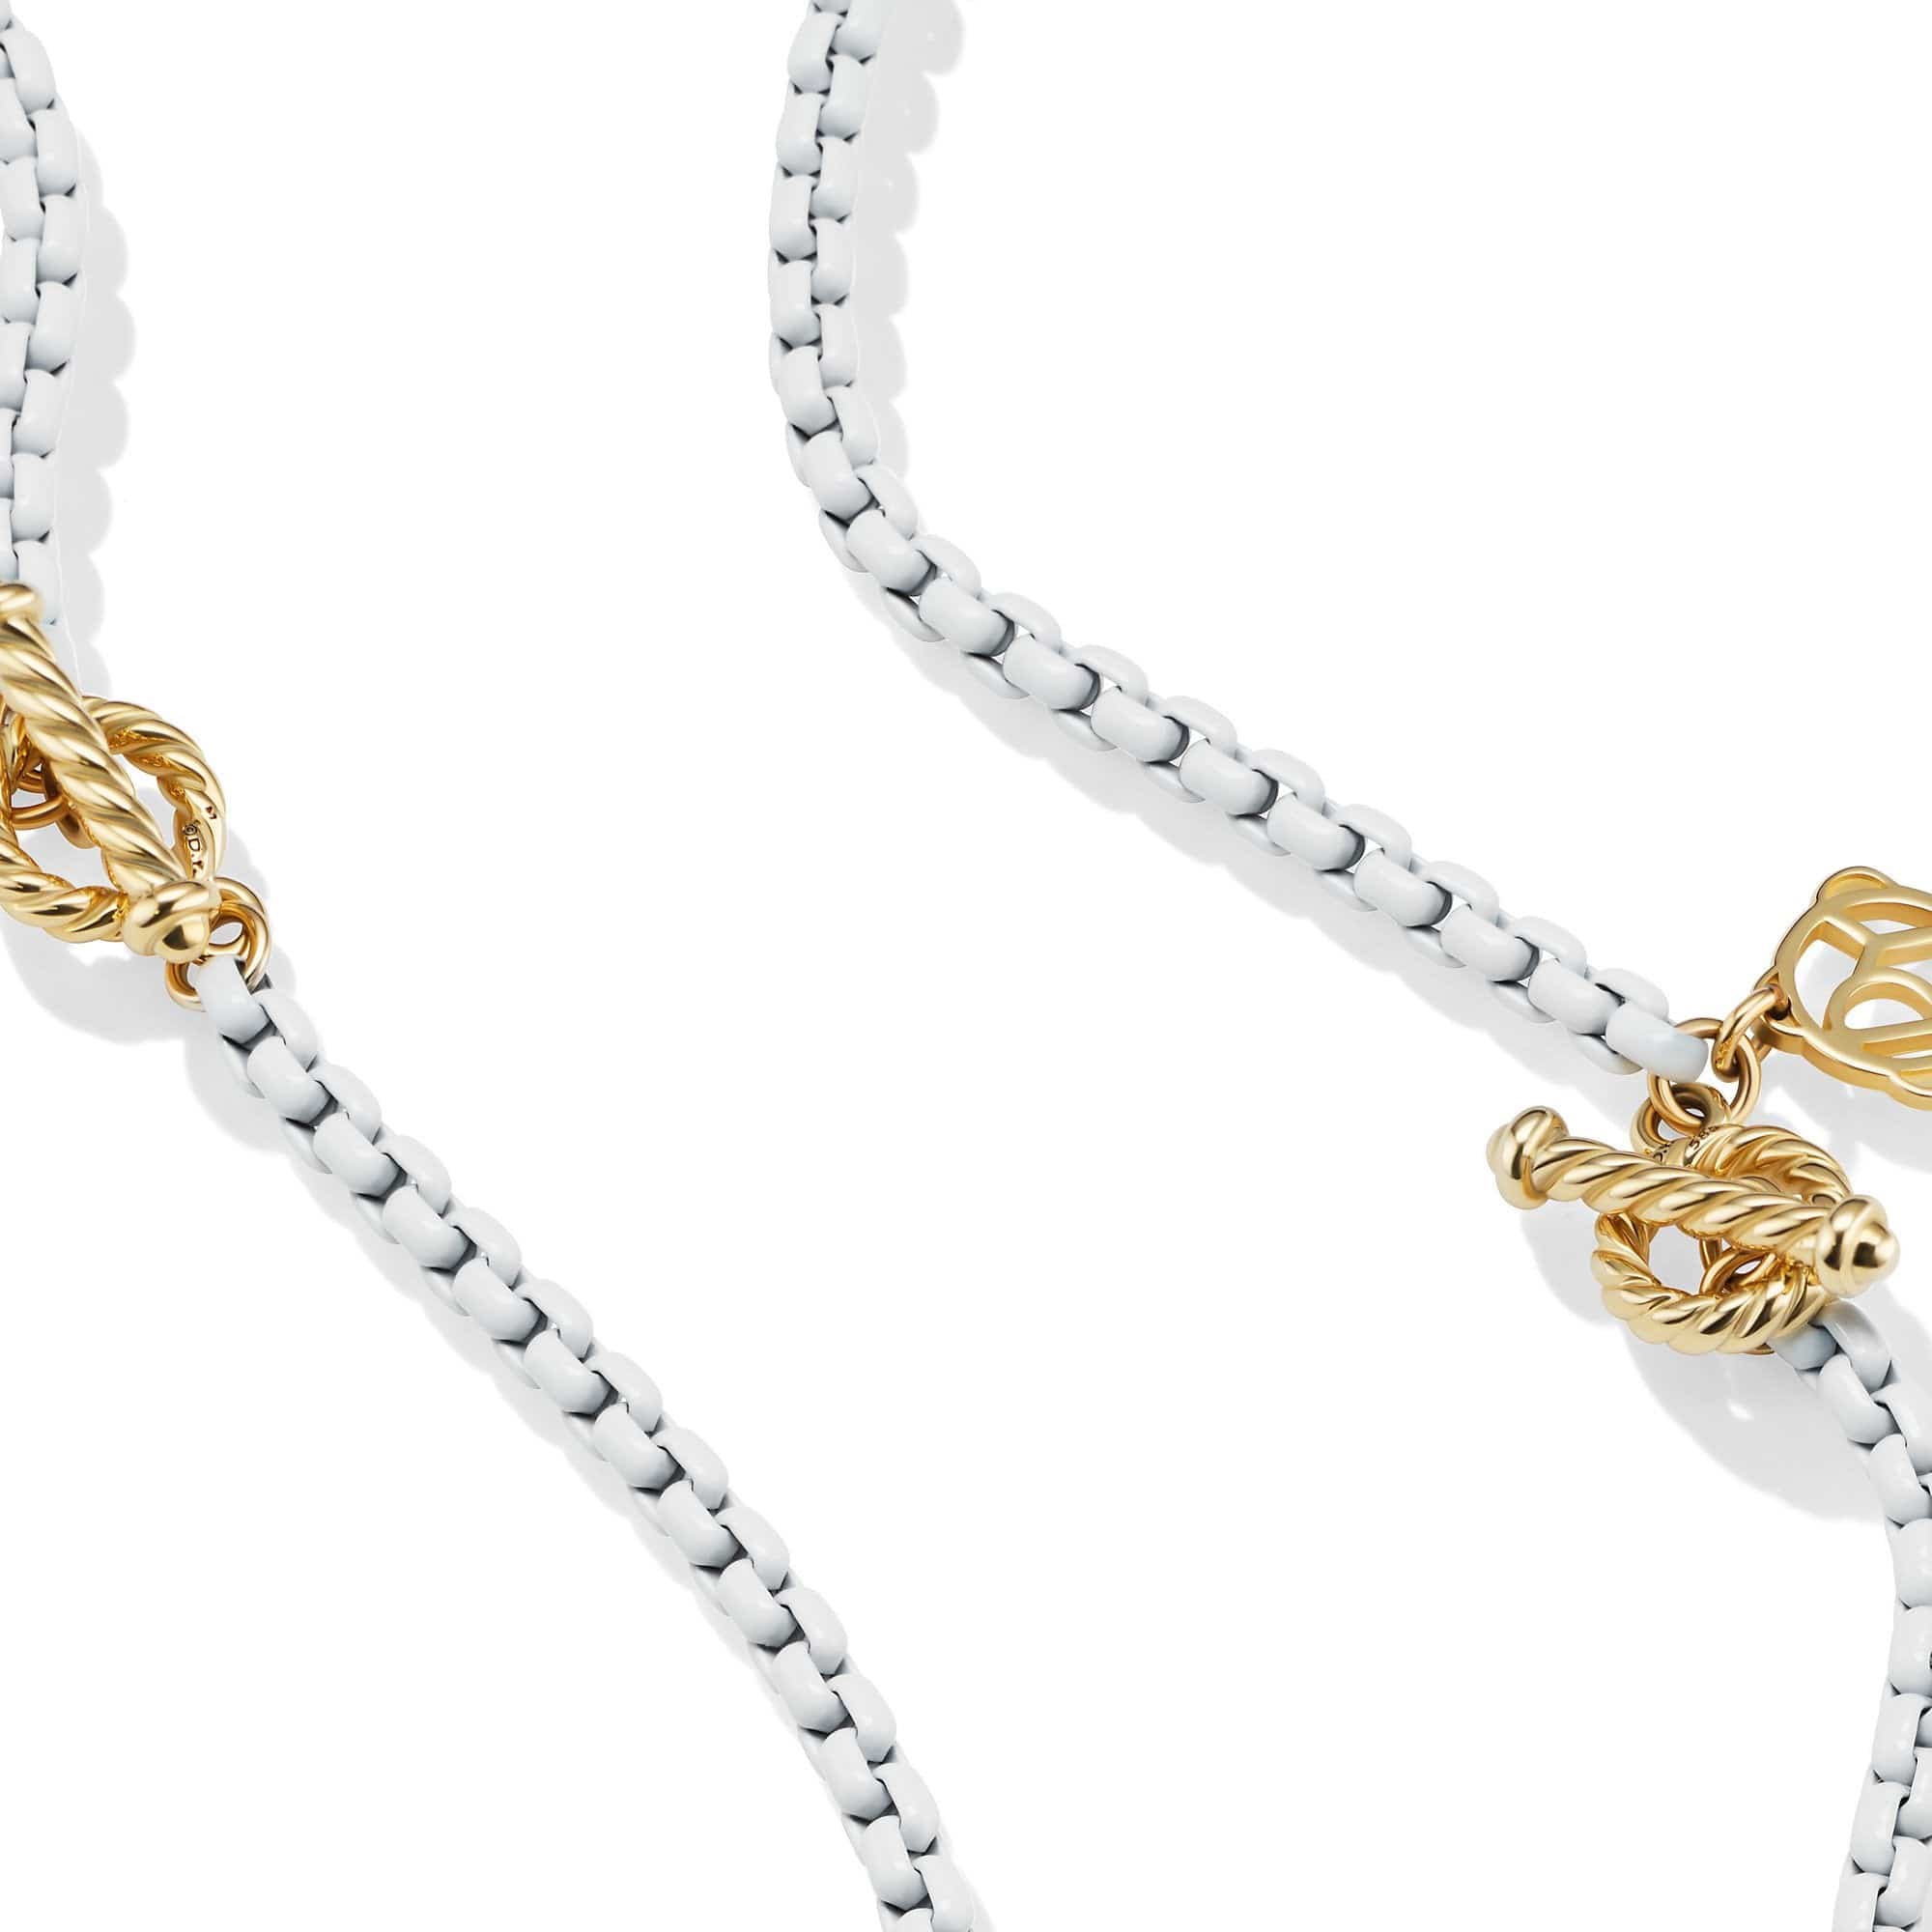 DY Bel Aire Chain in White with 14K Gold Accents